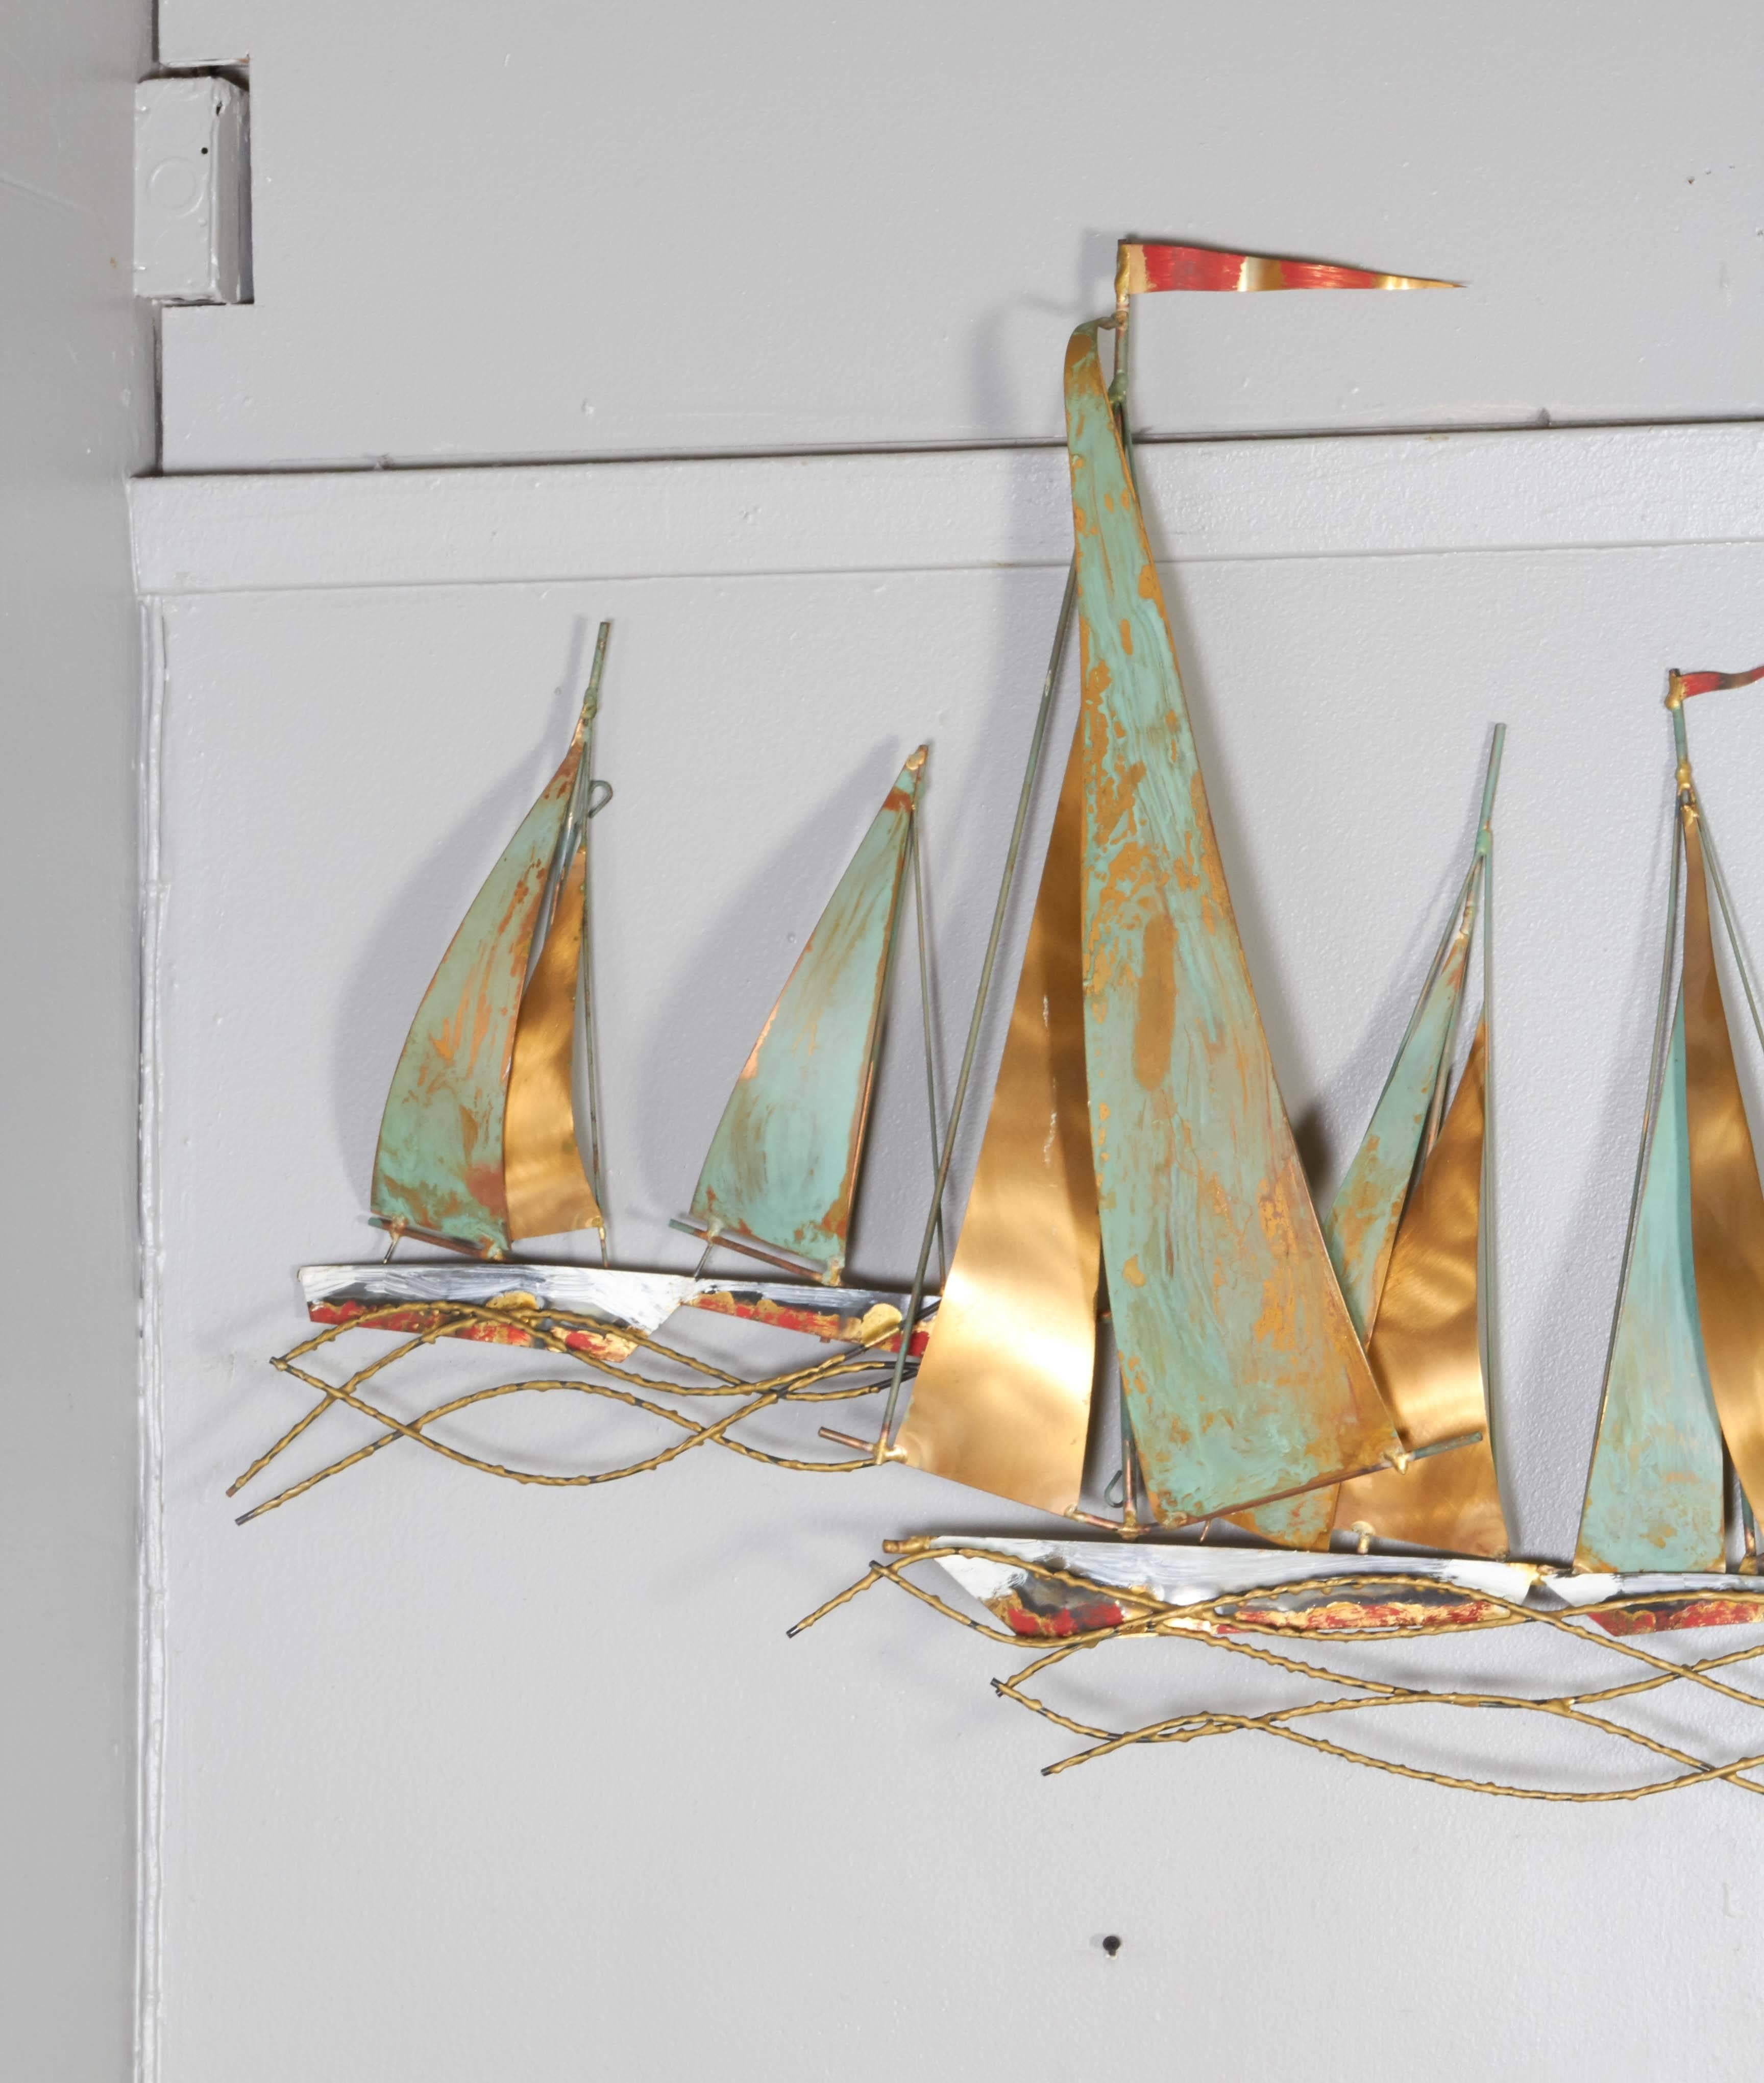 A wall-mounted Curtis Jere sculpture, comprised of soldered and reworked mixed metals, which form sailboats on rippling waves, detailed with verdigris patina and enamel. Markings include signature and date [© C. Jere '68] on the far right boat. This